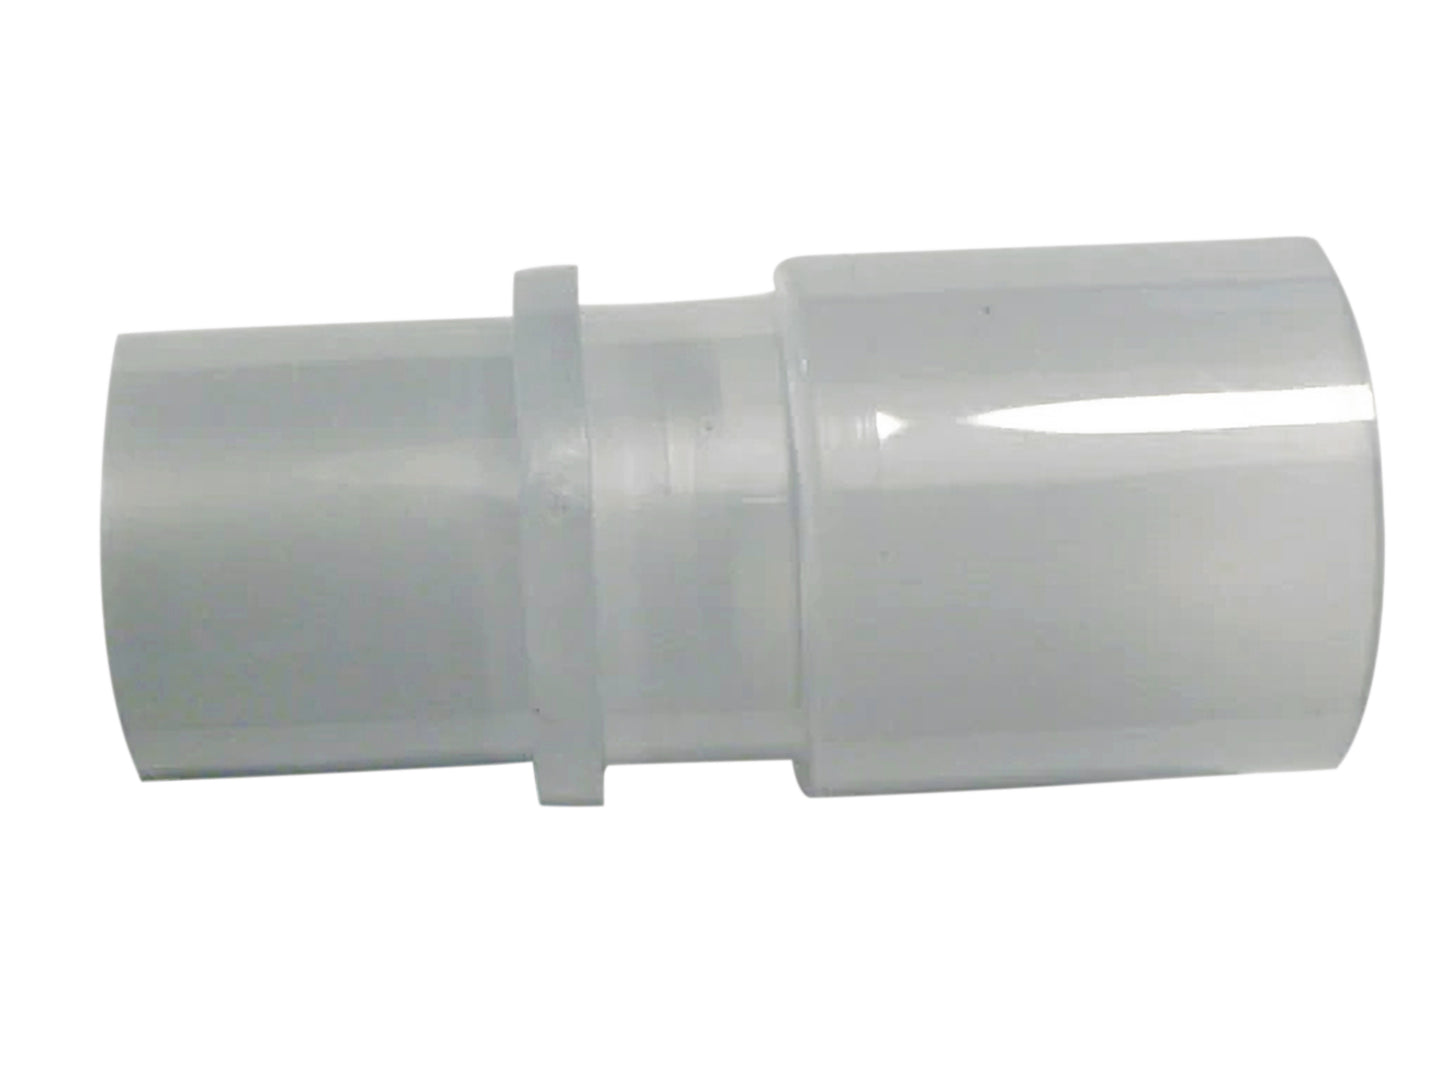 A hose swivel connector for CPAP masks